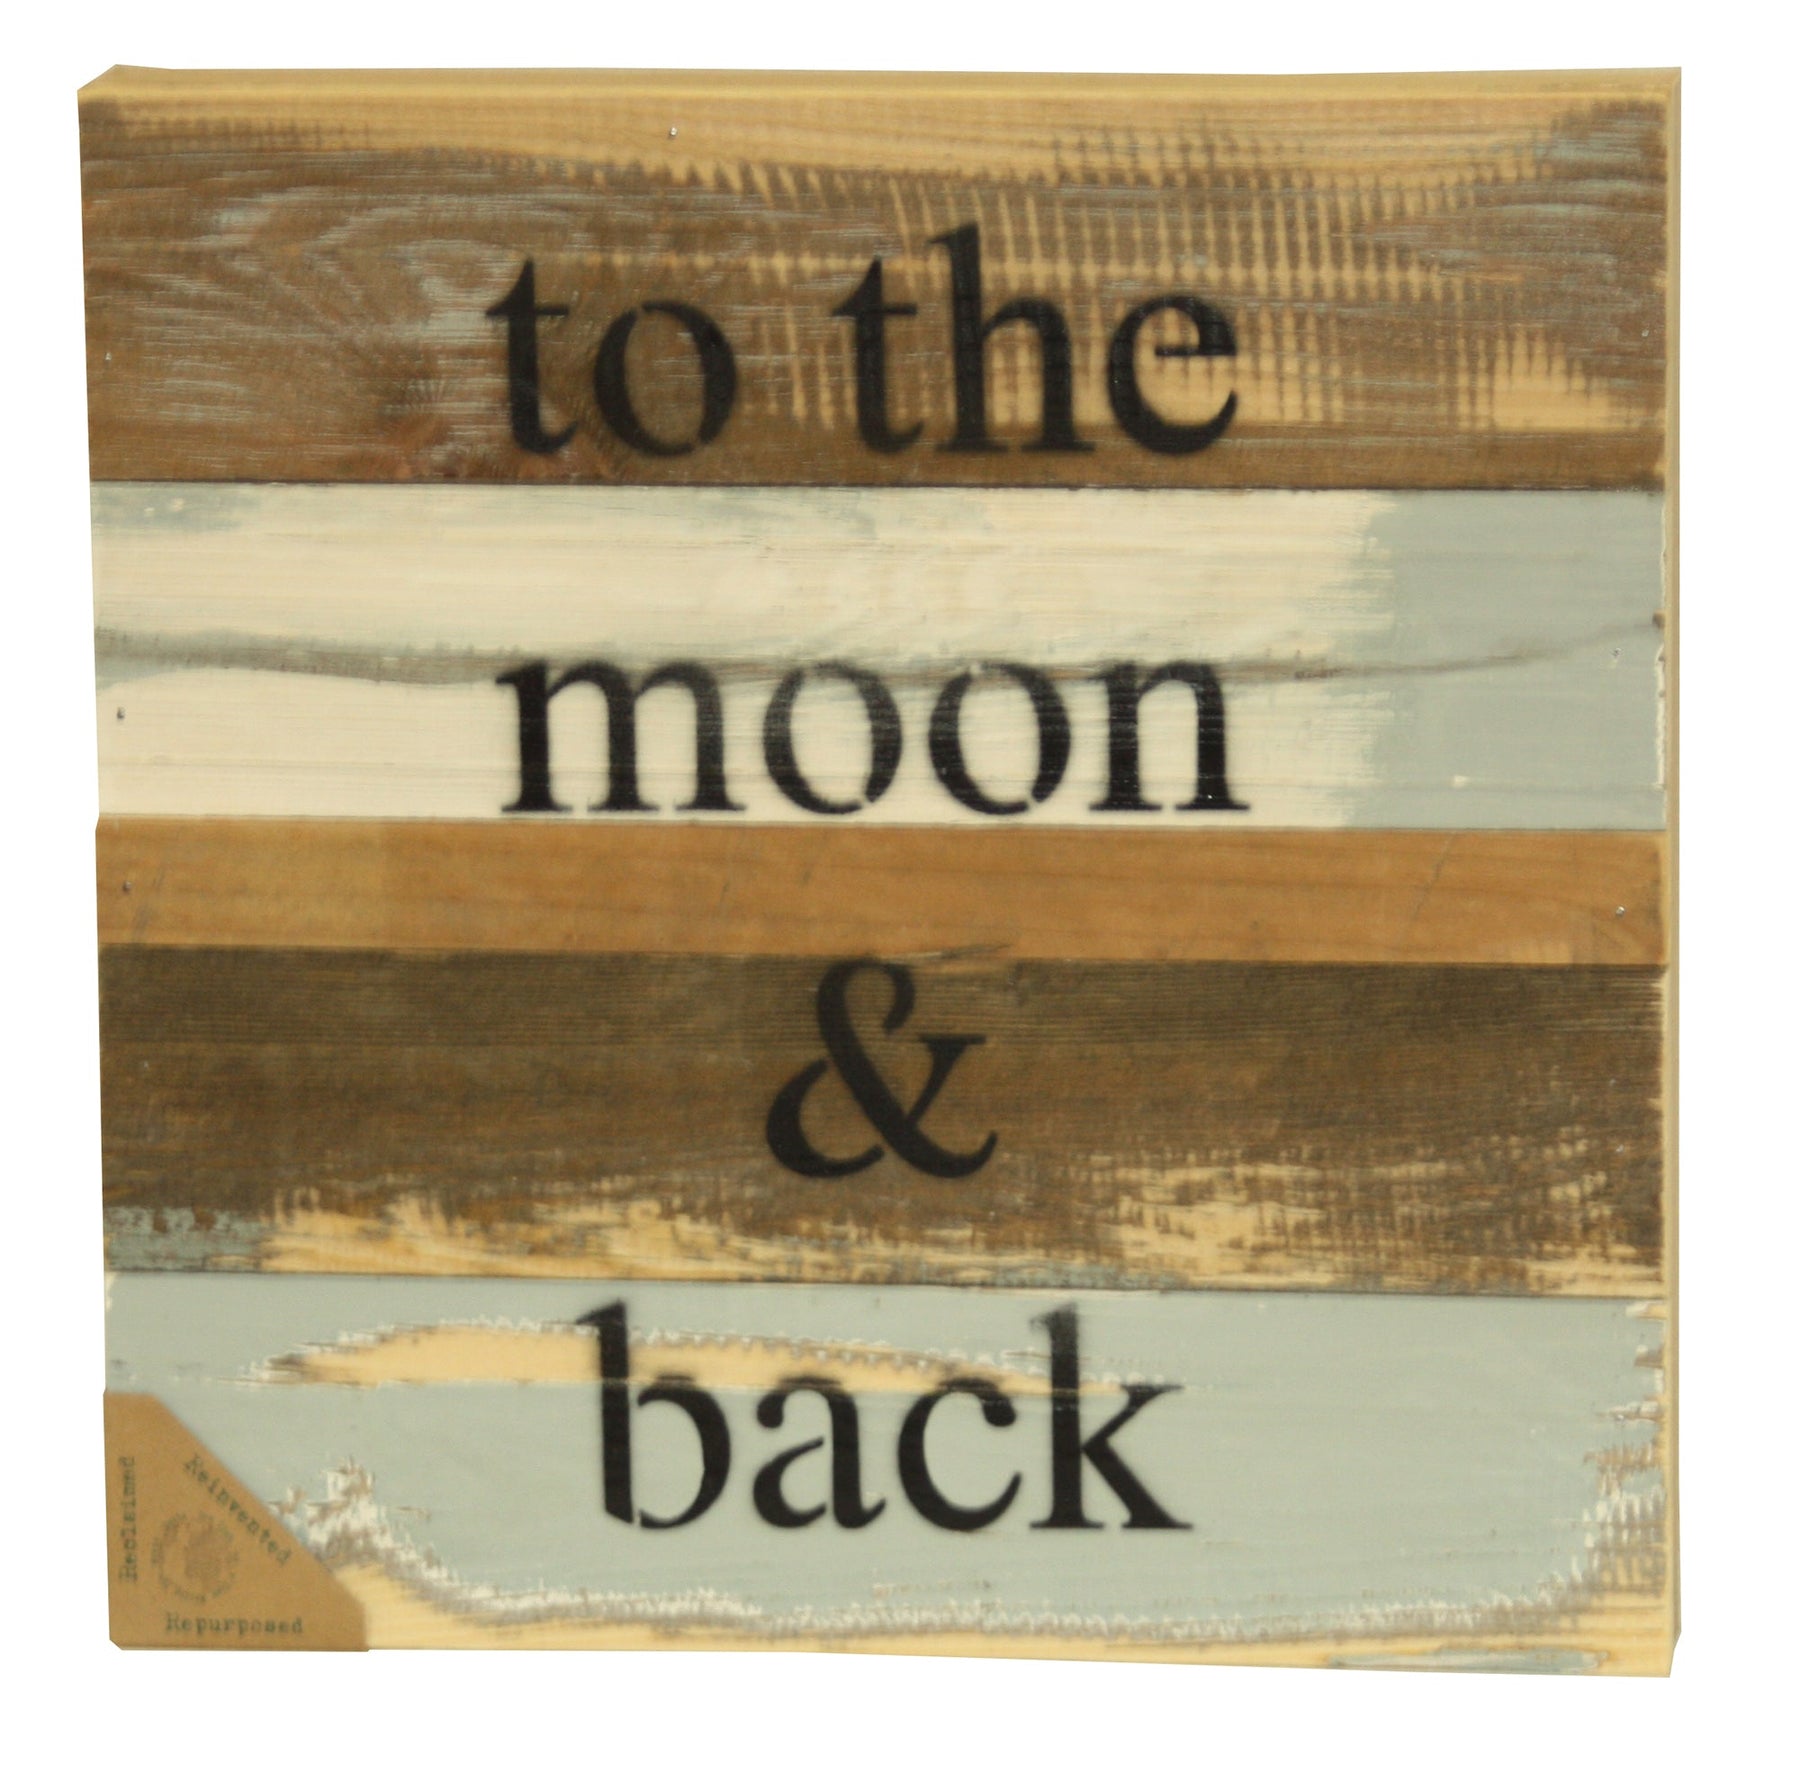 To the moon and back / 12x12" Reclaimed Wood Wall Art